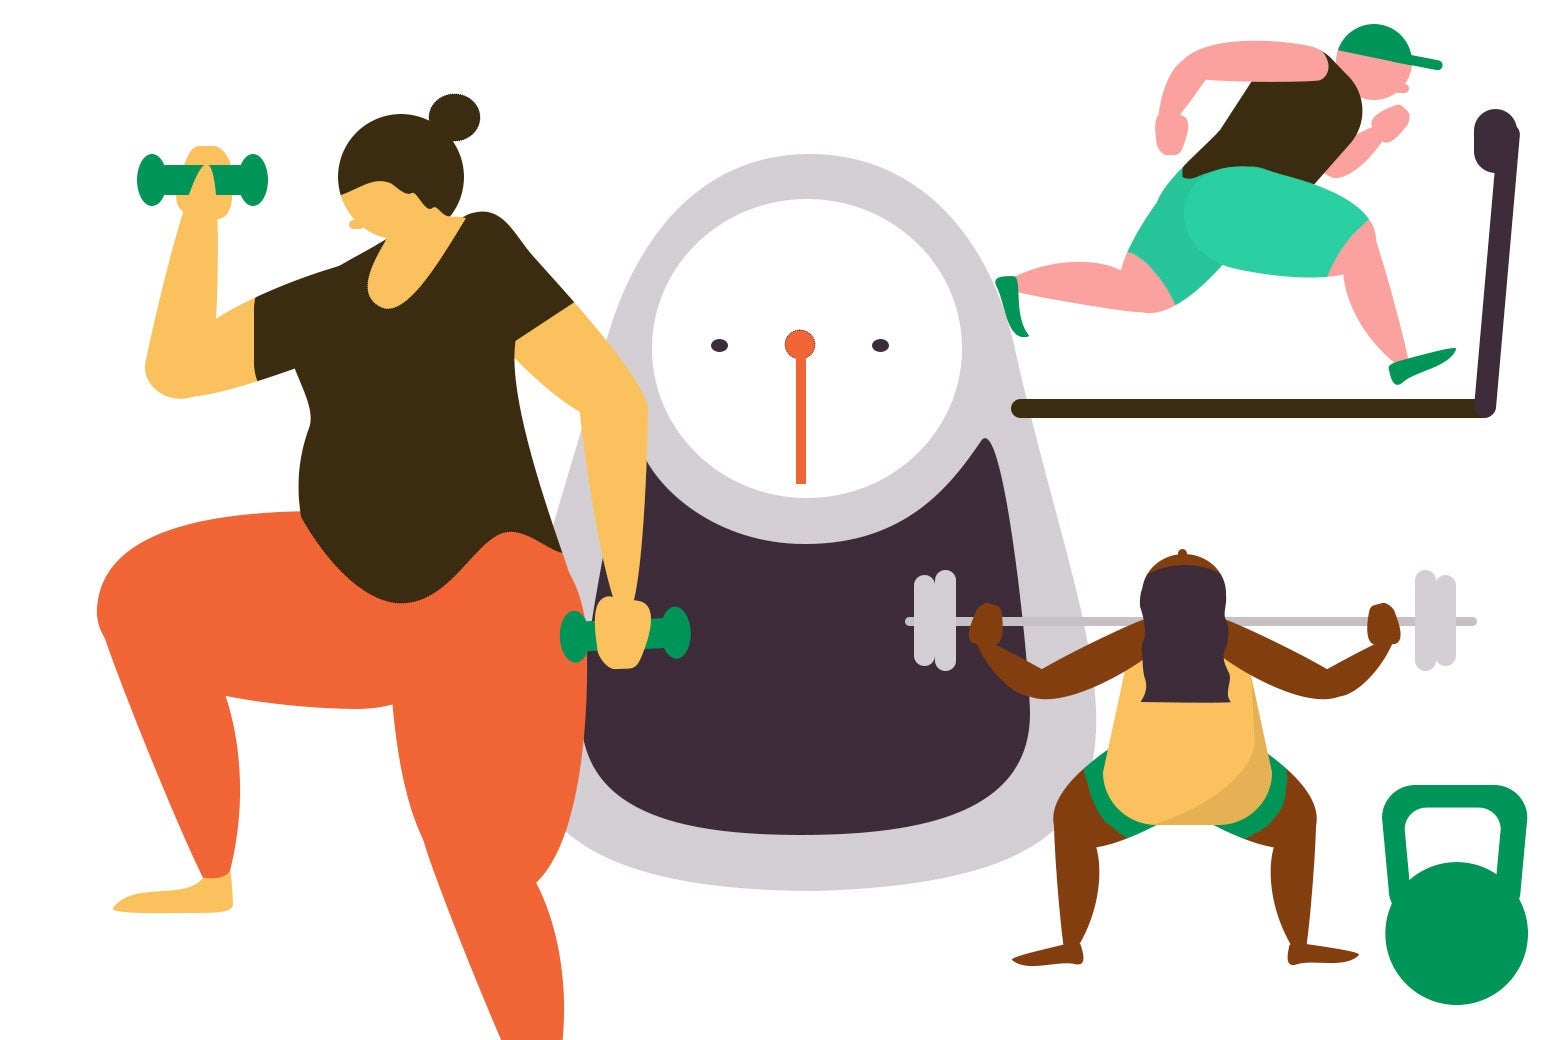 An illustration of people lifting weights and running on a treadmill with a scale in the middle.